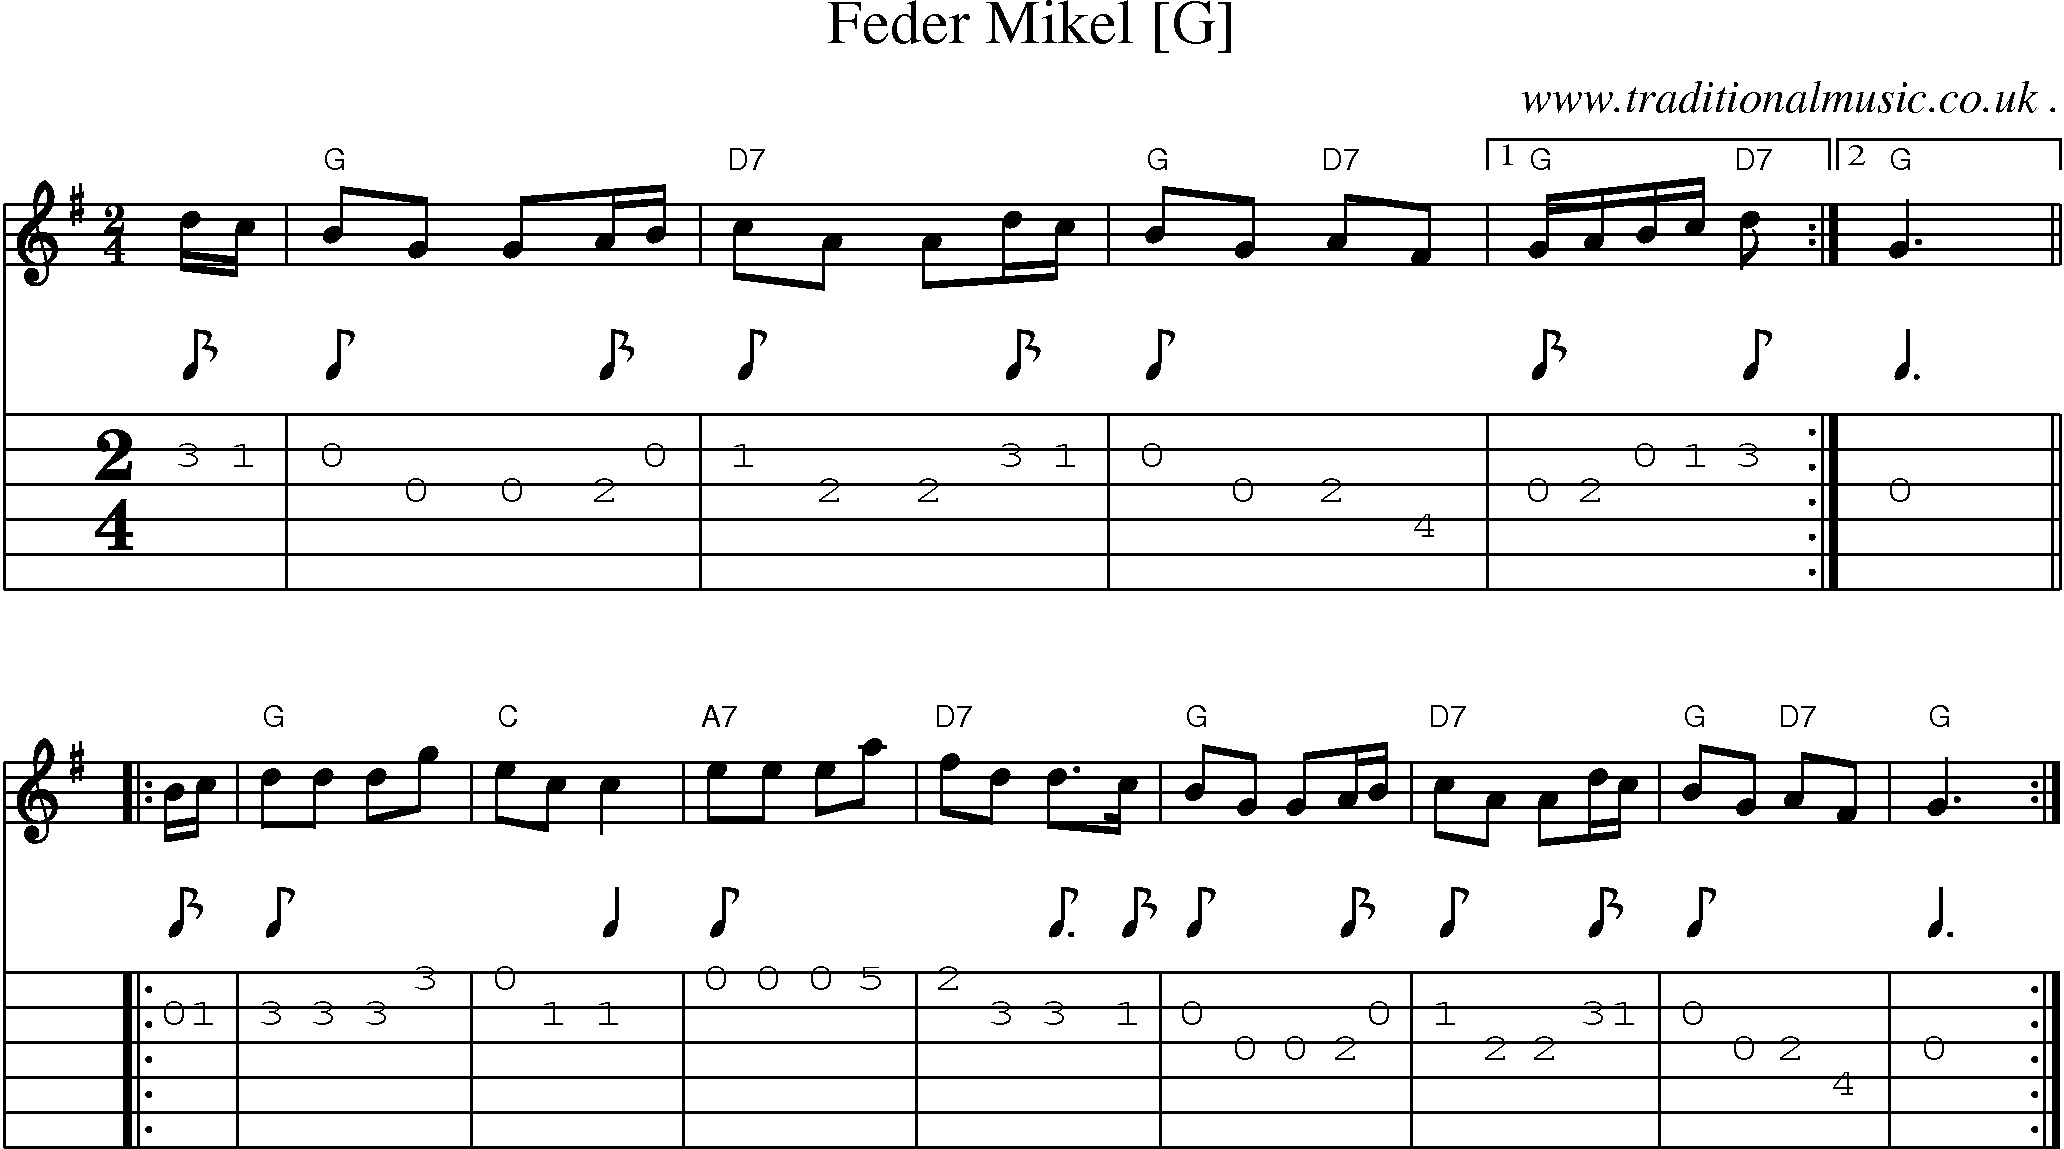 Sheet-music  score, Chords and Guitar Tabs for Feder Mikel [g]